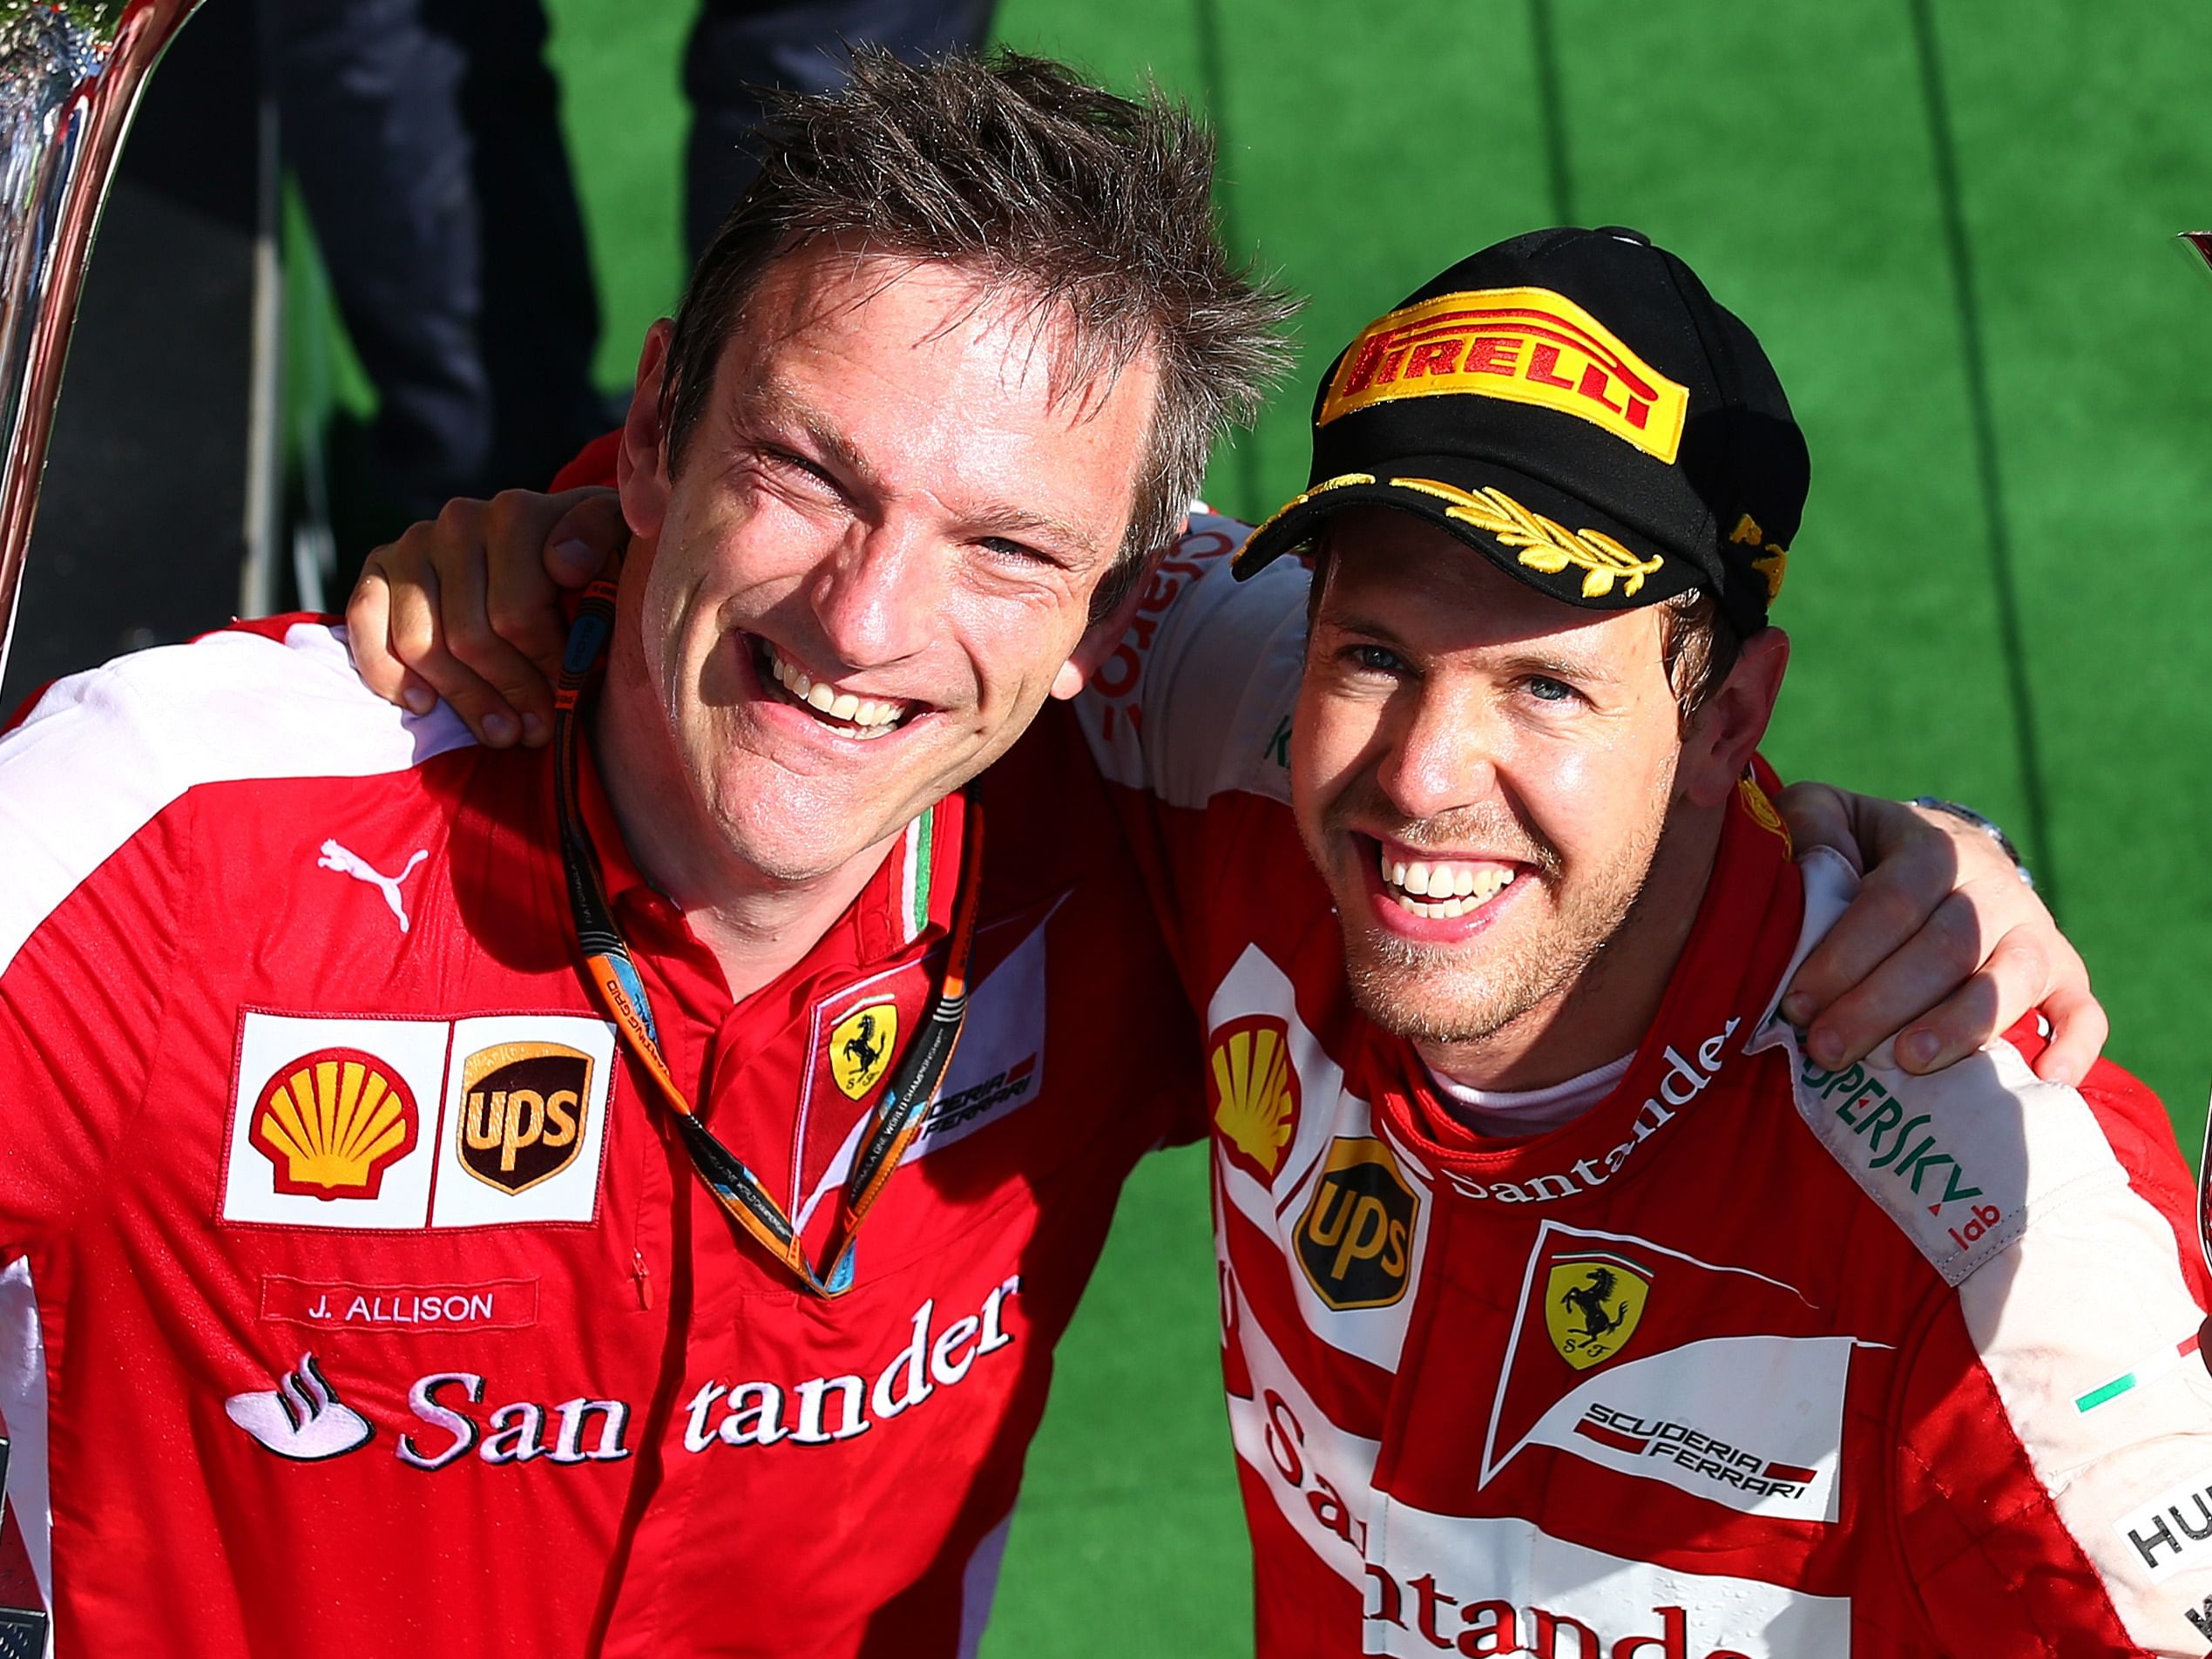 Sebastian Vettel celebrates with James Allison after winning the 2015 F1 Hungarian Grand Prix. (Photo by Mark Thompson/Getty Images)